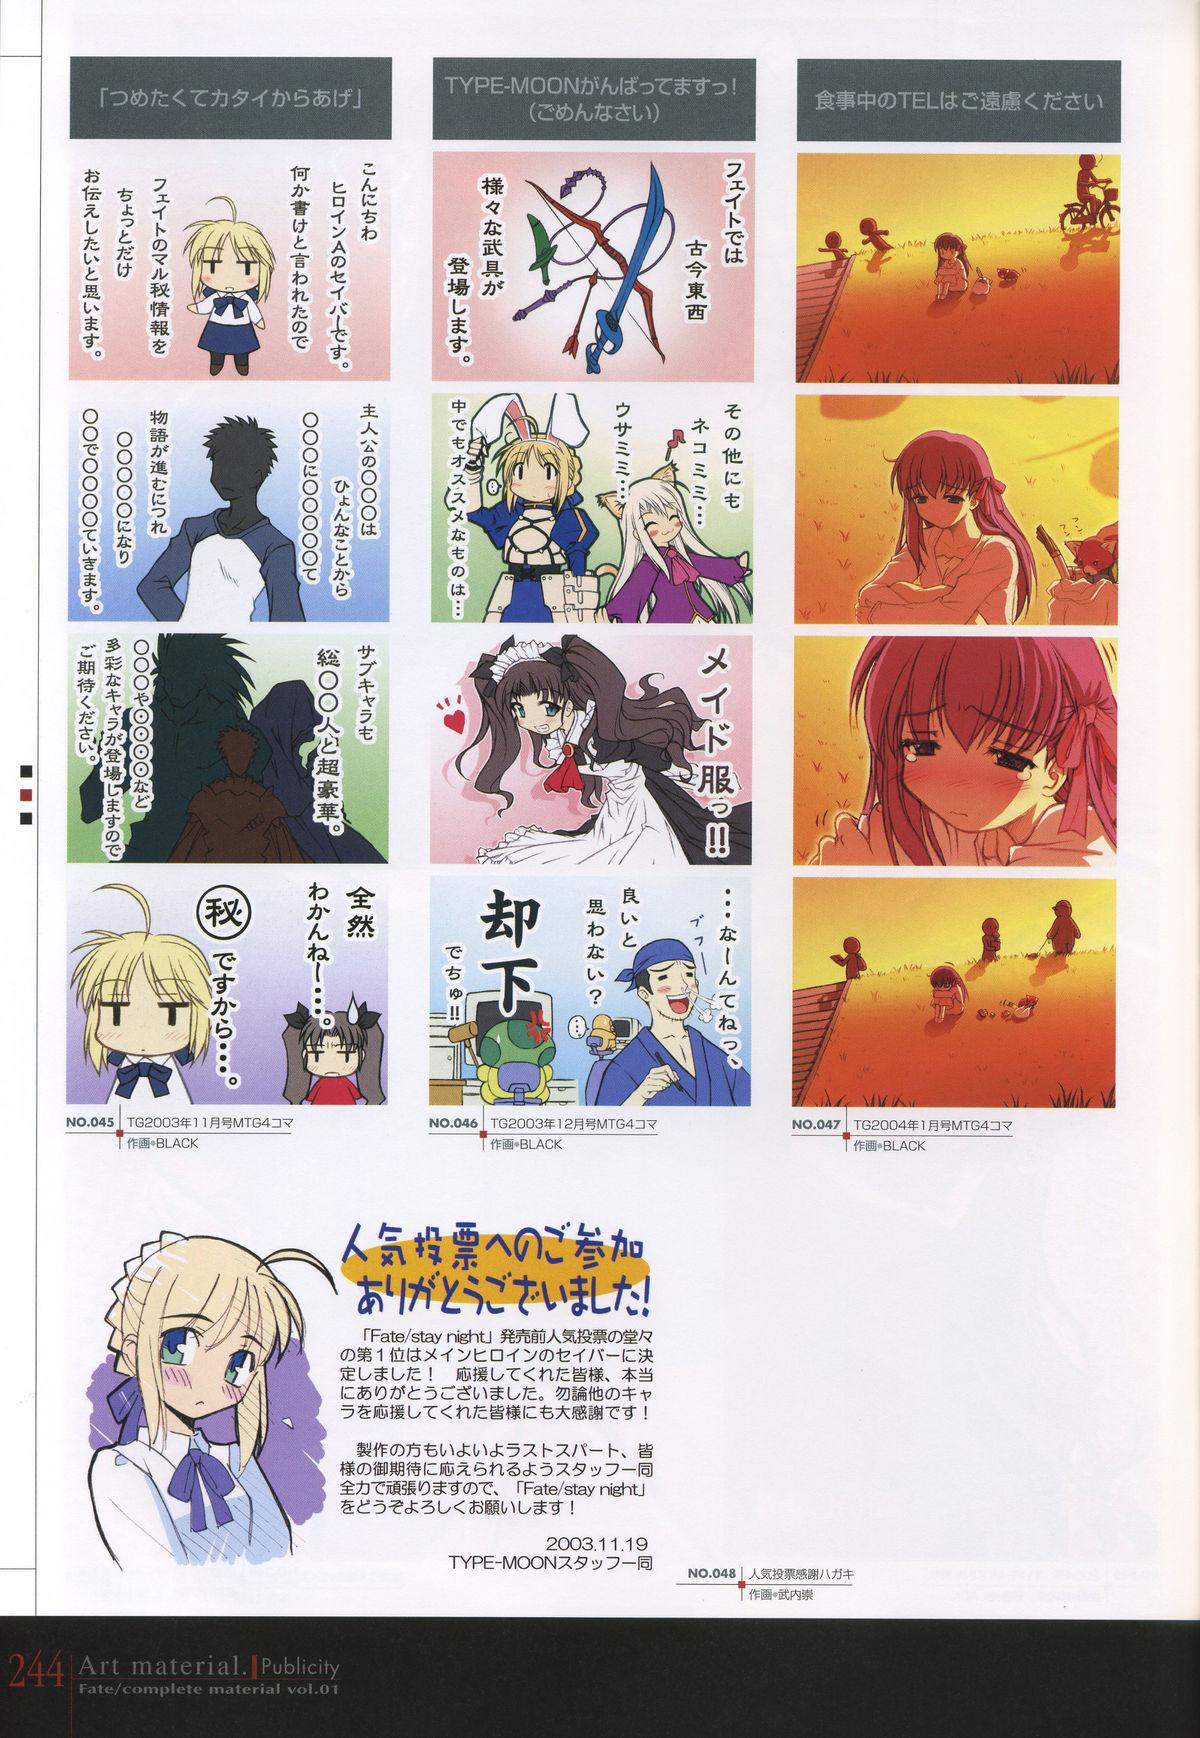 Fate/complete material I - Art material. 248